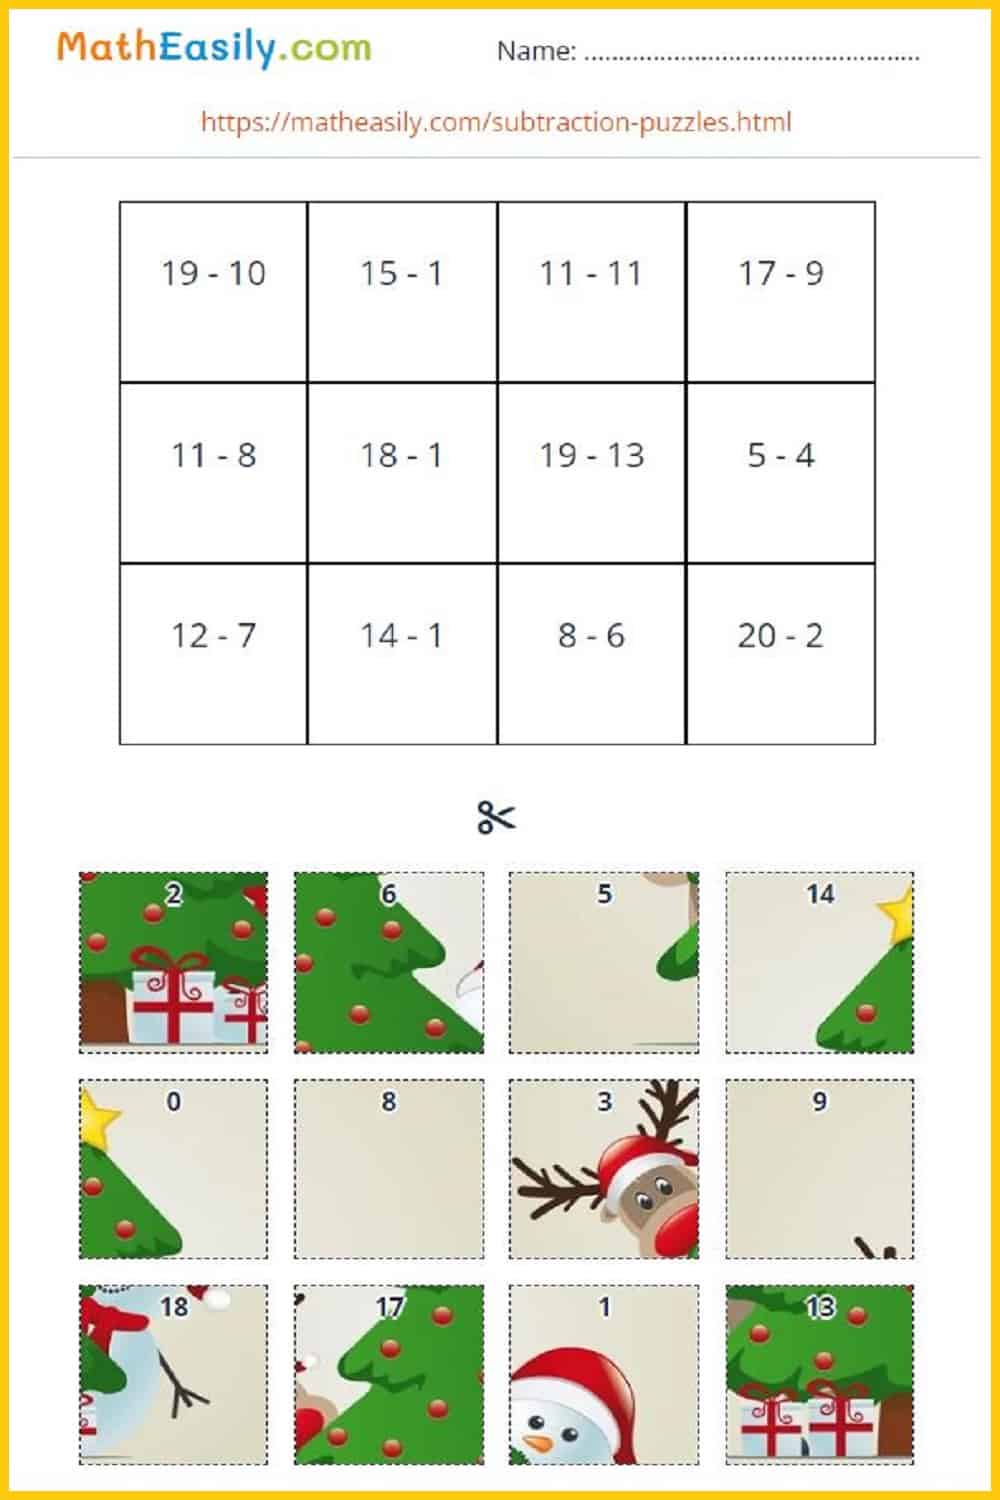 free christmas math worksheets subtraction.
Math Christmas puzzles PDF. christmas math worksheets for kindergarten PDF. fun christmas math worksheets for kids. 
Free printable math christmas worksheets PDF. Printable christmas worksheets for preschoolers. 
free christmas worksheets printables. preschool christmas worksheets pdf.